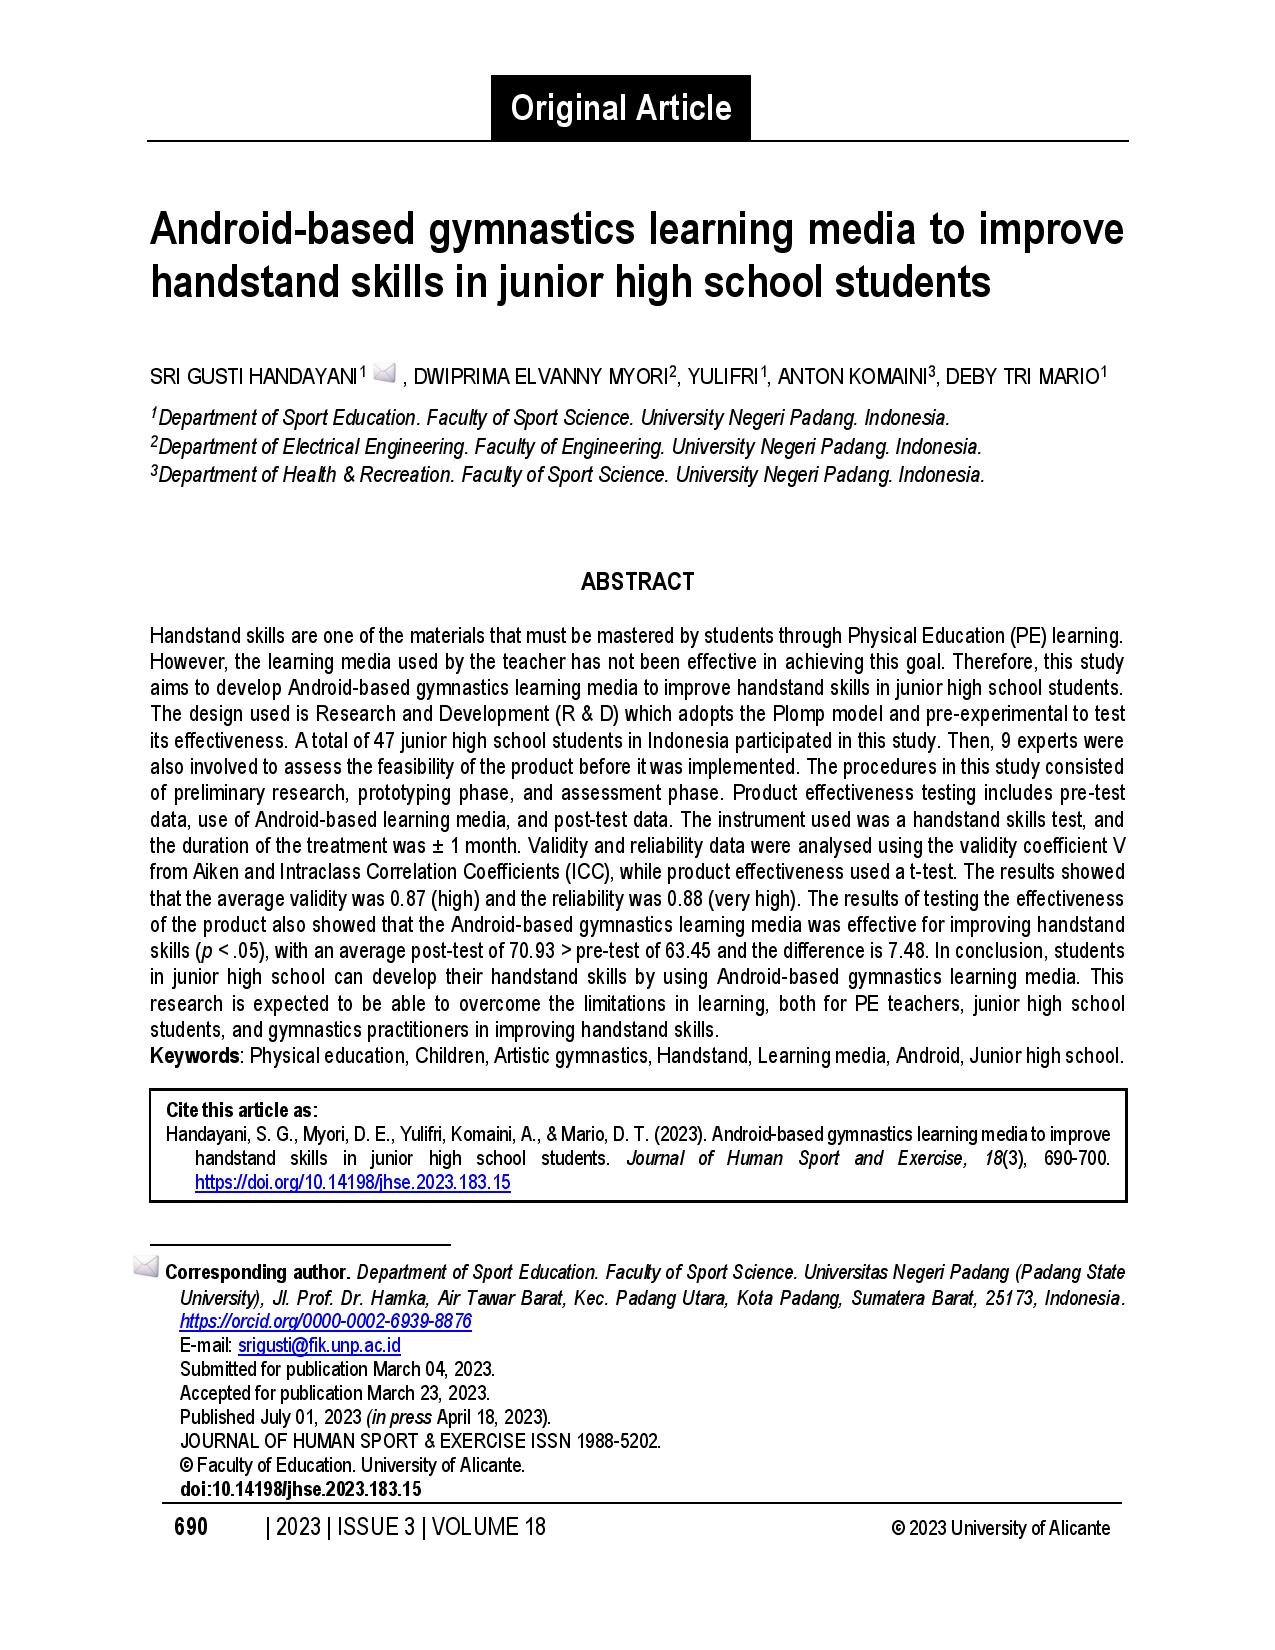 Android-based gymnastics learning media to improve handstand skills in junior high school students